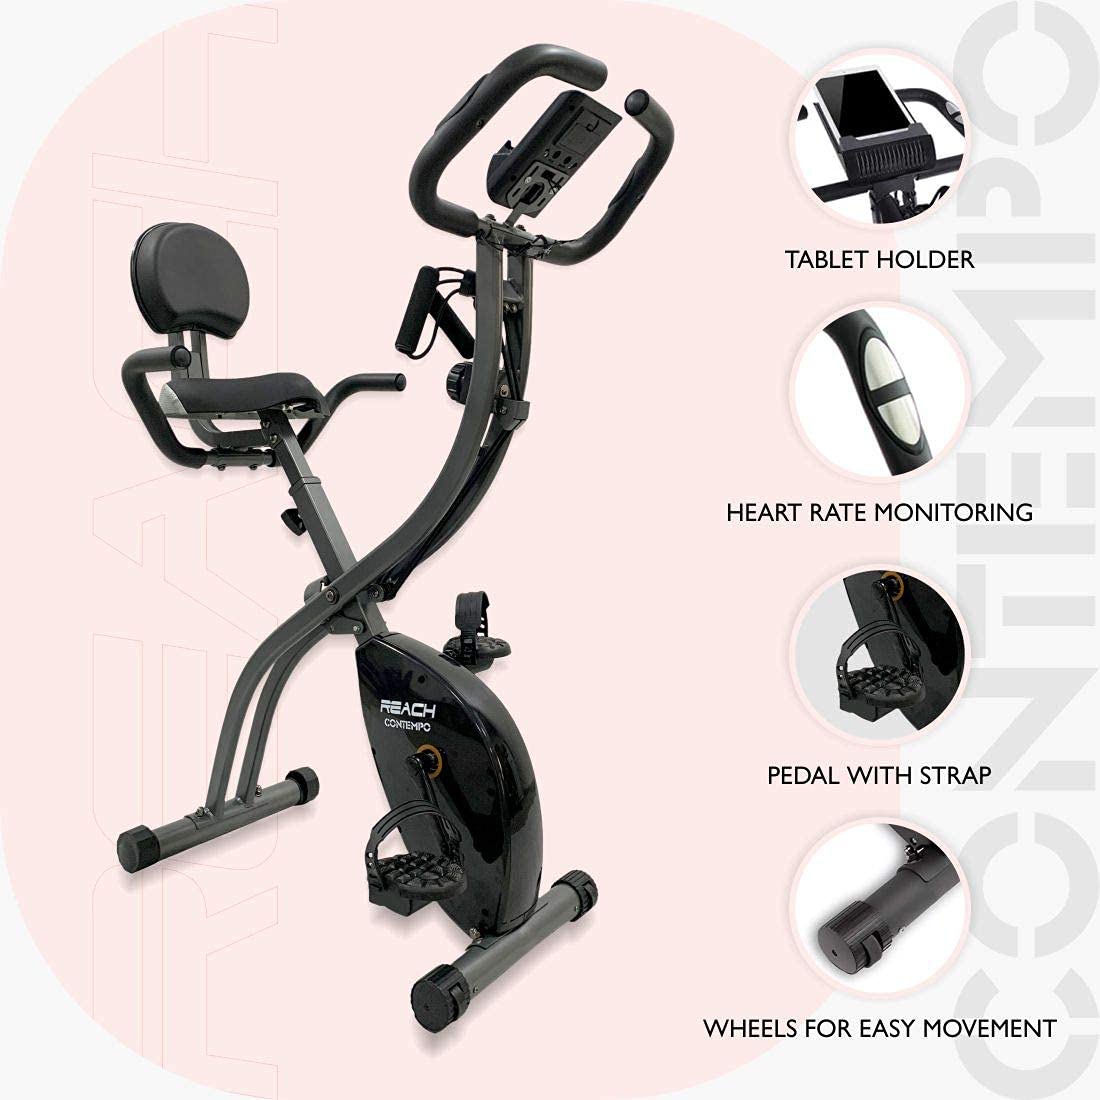 Reach Contempo Smart Foldable Exercise Cycle for Home Gym Indoor Equipment | 2-in-1 X-Bike with Back & Hand Support + Resistance Rope | Gym Bike with Magnetic Resistance for Full Body Exercise & Cardio Fitness Workouts for Men & Women